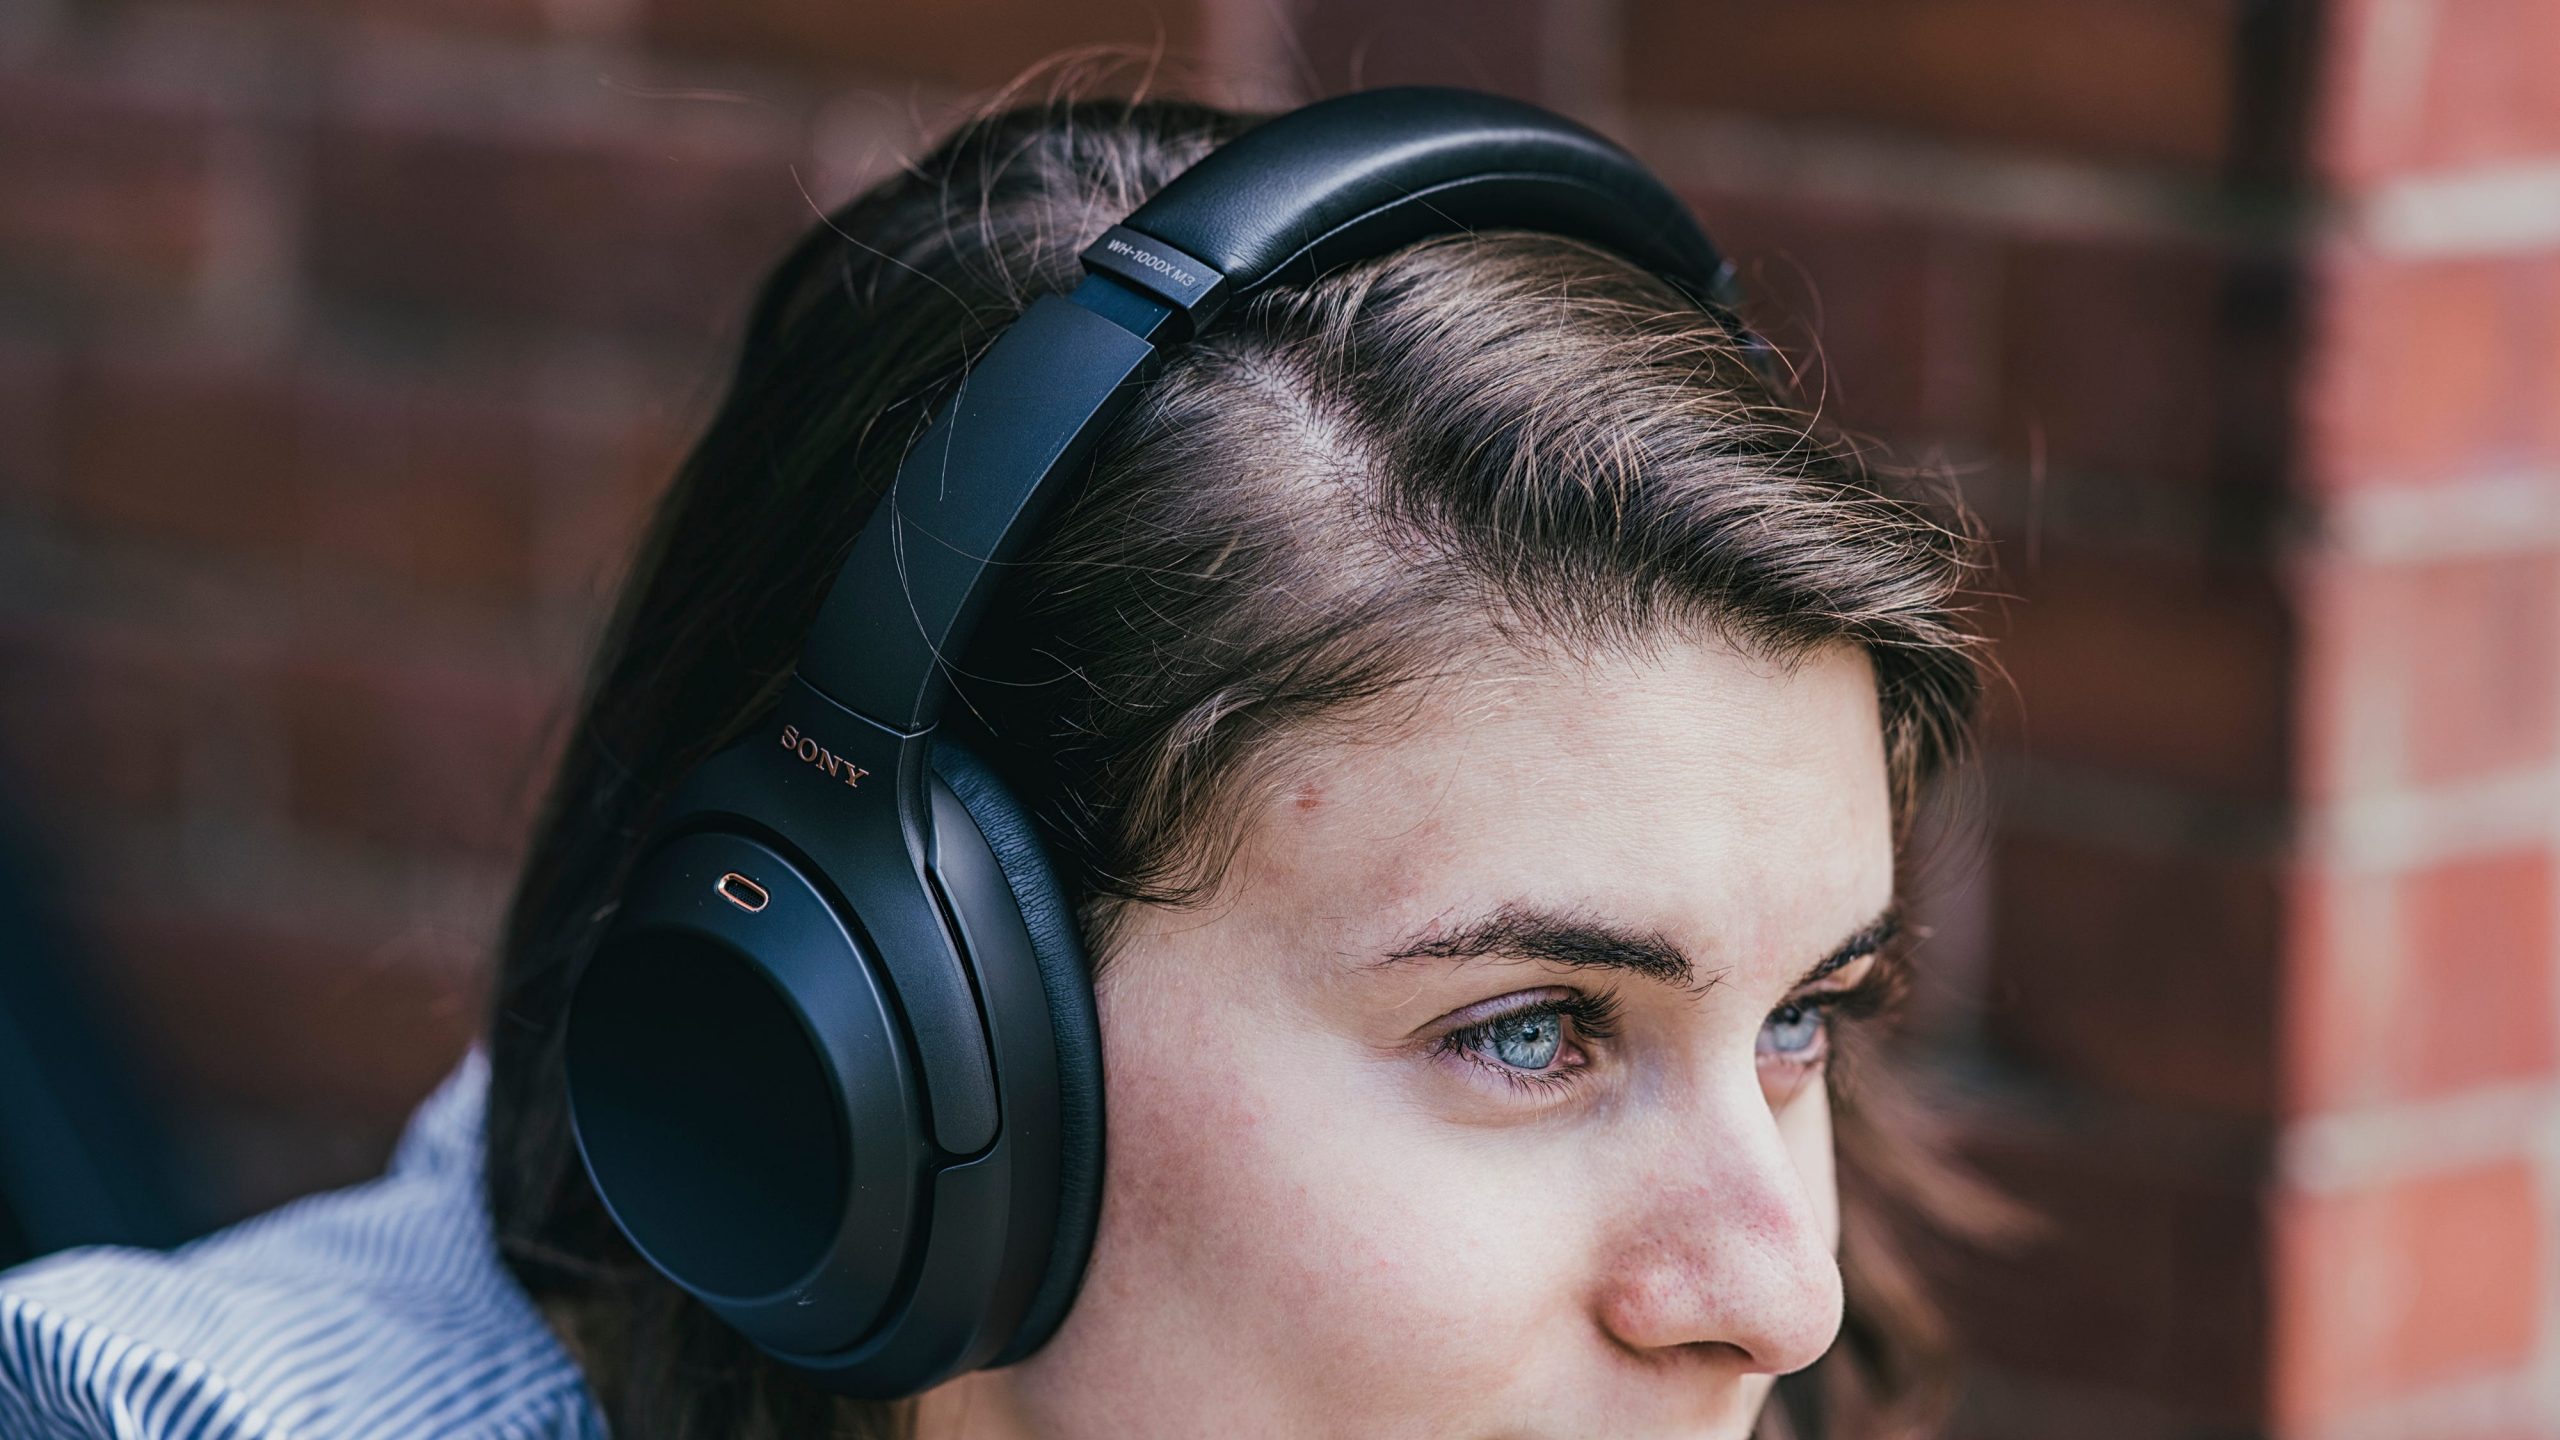 Do Noise-Cancelling Headphones Hurt Your Ears?